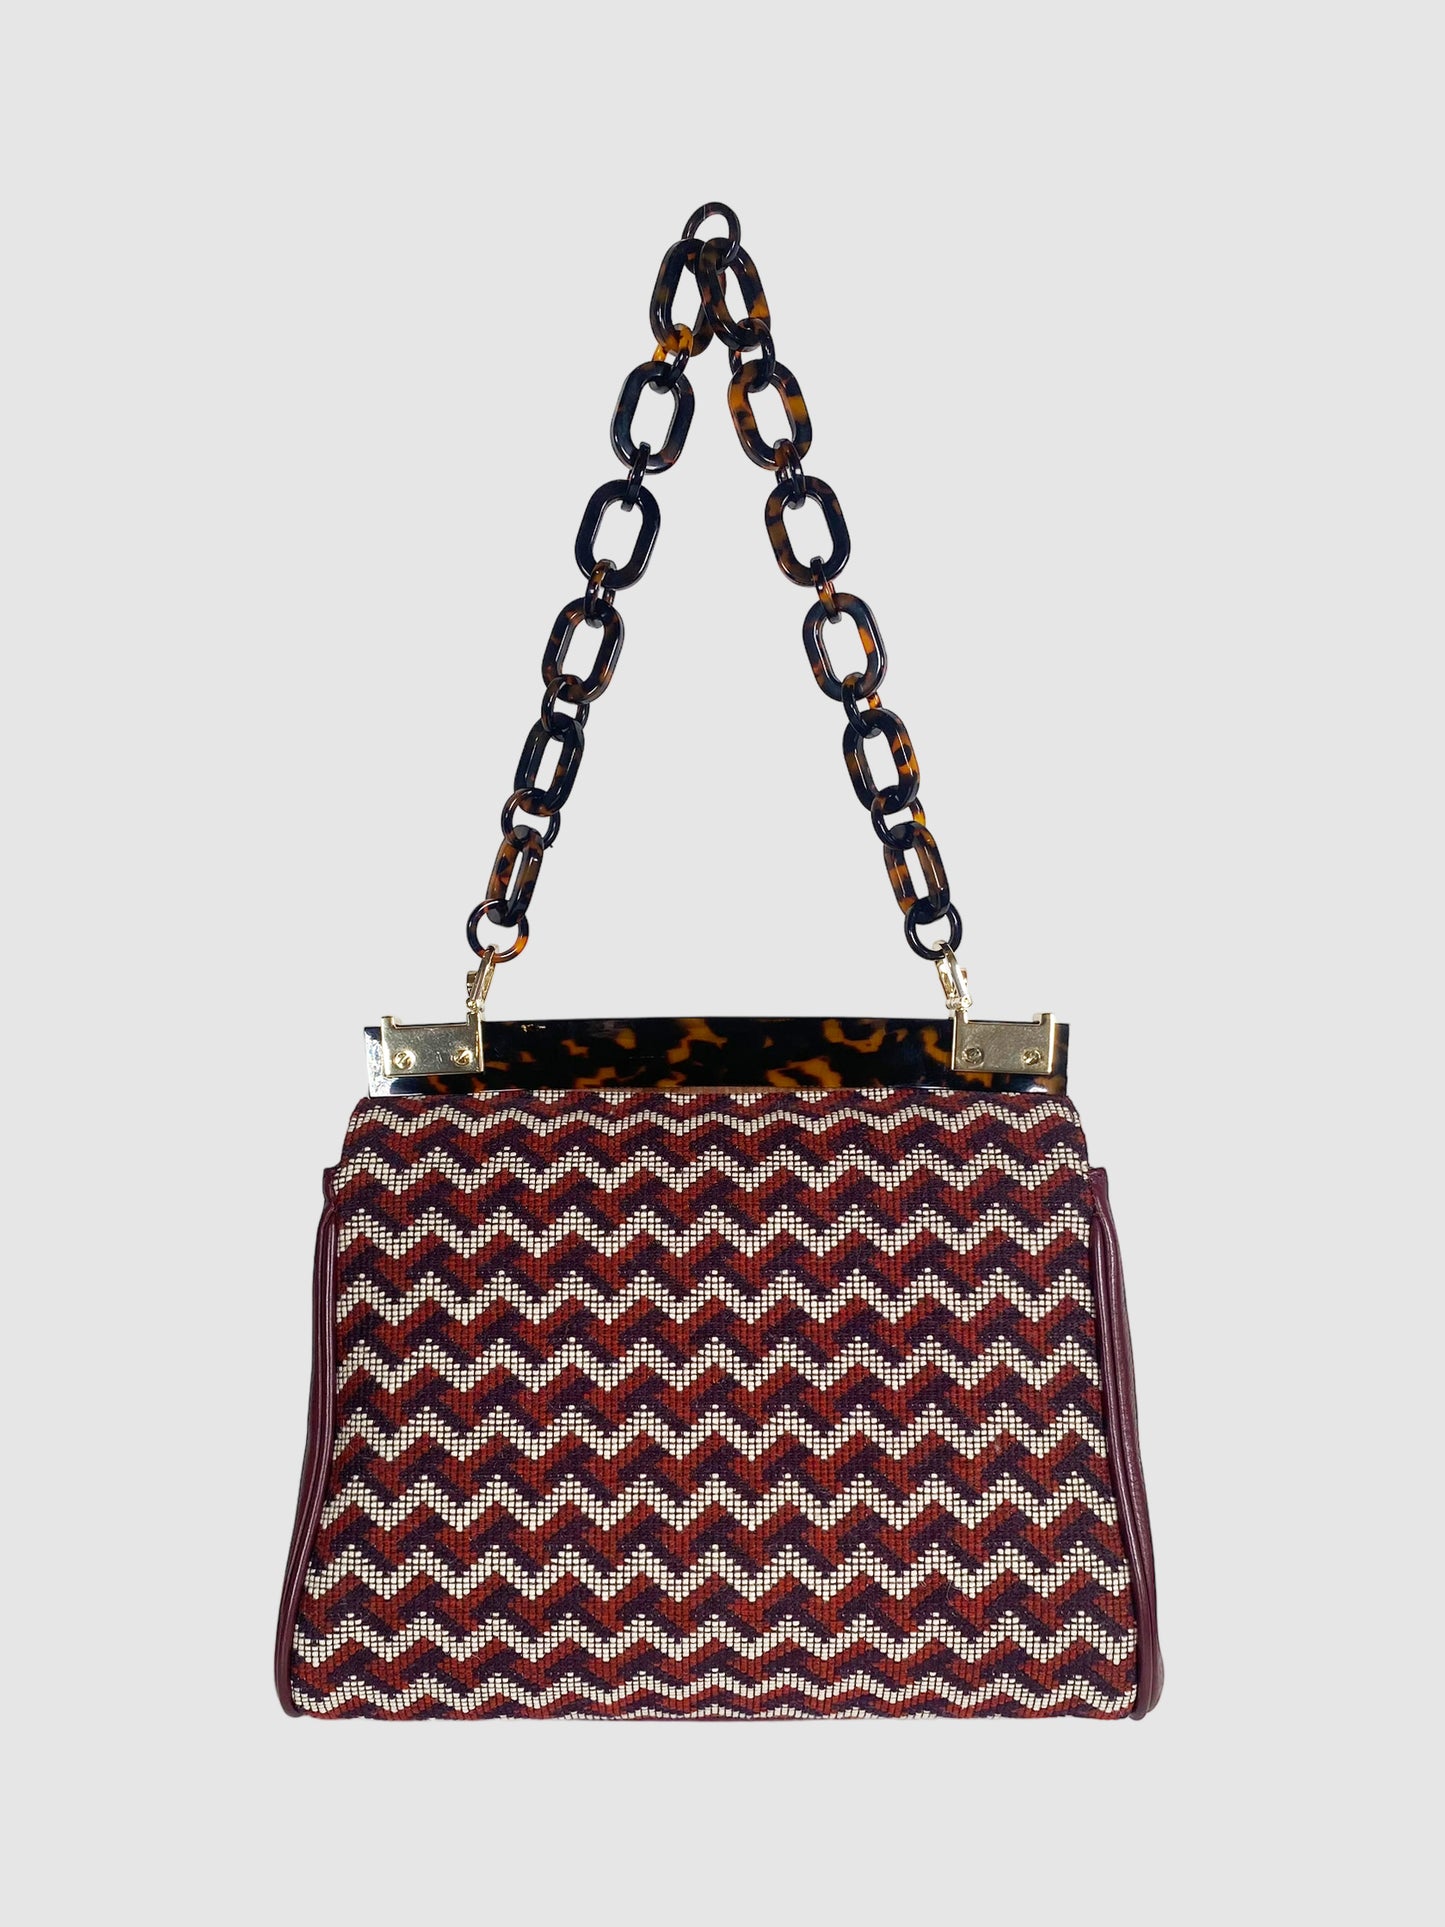 Tory Burch Woven and Leather Shoulder Bag